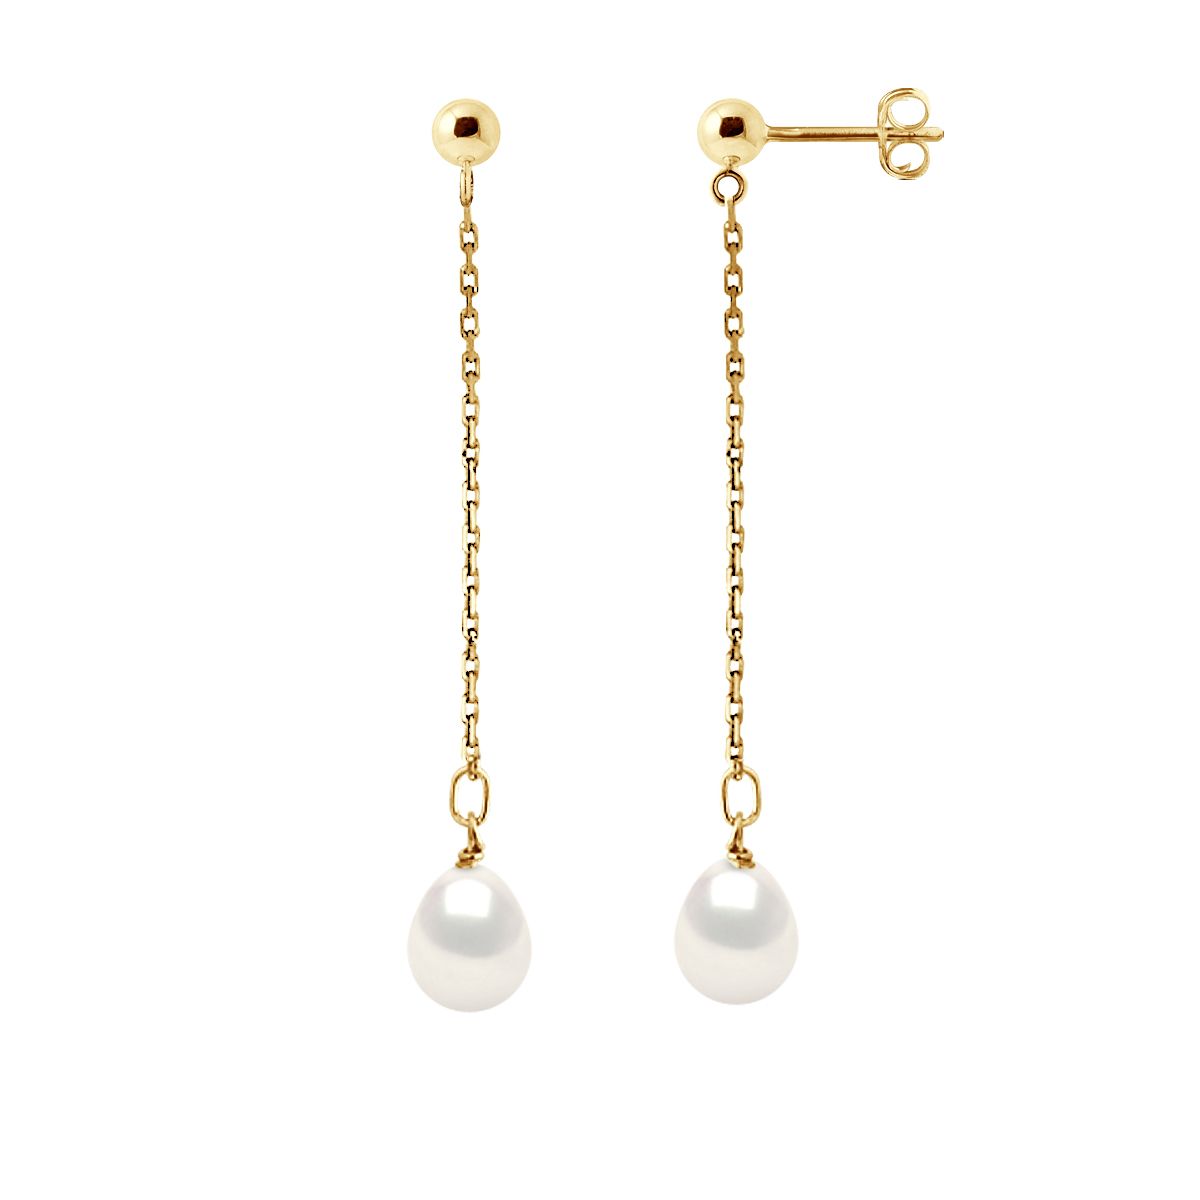 Earrings of true Cultured Freshwater Pearls Pear Shape 7-8 mm - 0,31 in - Natural White Color Push System and chain Gold - Our jewellery is made in France and will be delivered in a gift box accompanied by a Certificate of Authenticity and International Warranty